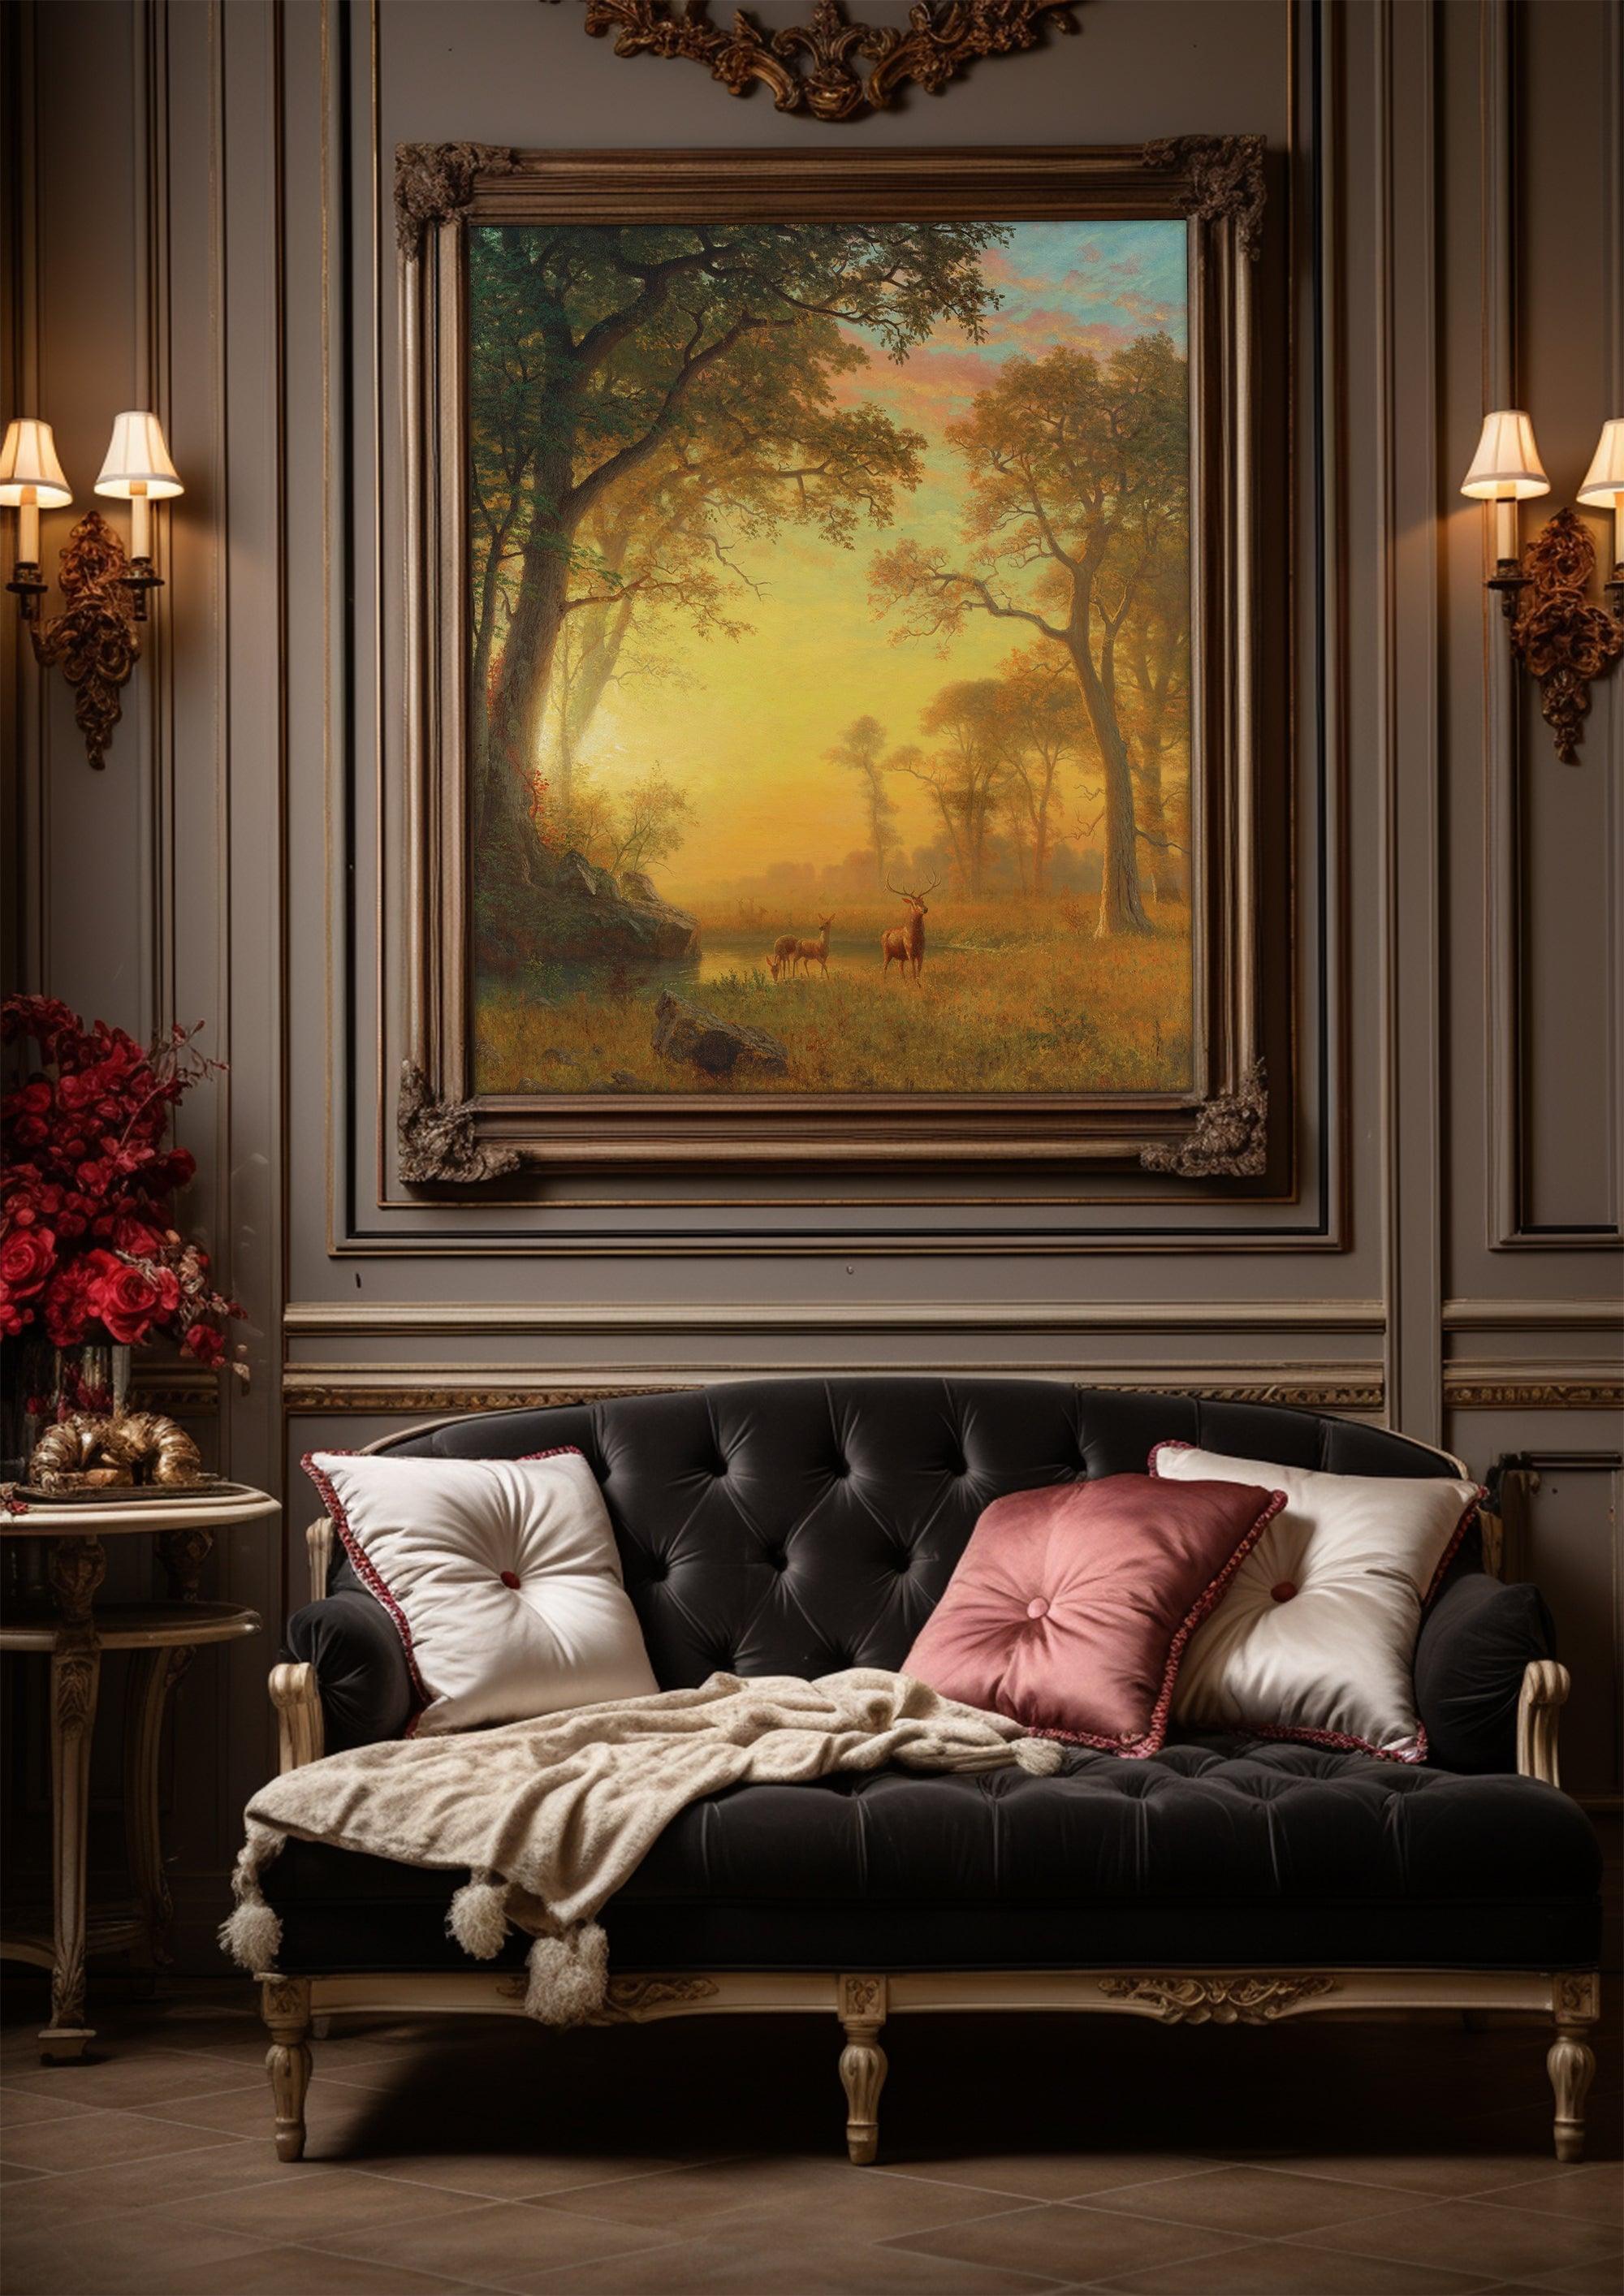 Landscape Canvas Prints - Immersive Art for Elegance and Inspiration，Moody Wall Decor，Giclée Printing Technique